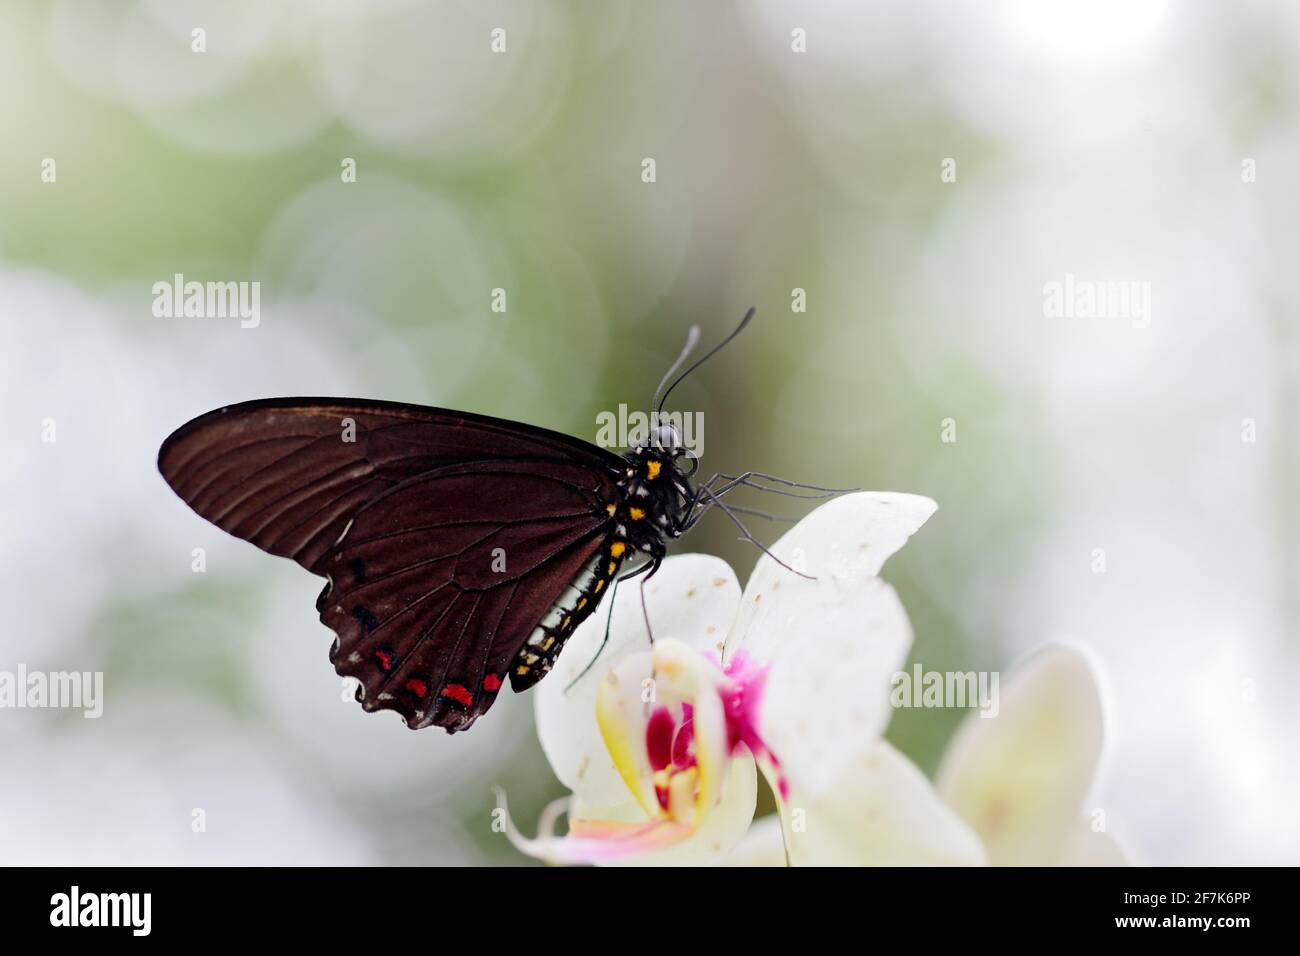 Common Mormon, Papilio polytes, beautiful butterfly from Costa Rica and Panama. Wildlife scene with insect from tropical forest. Butterfly sitting on Stock Photo